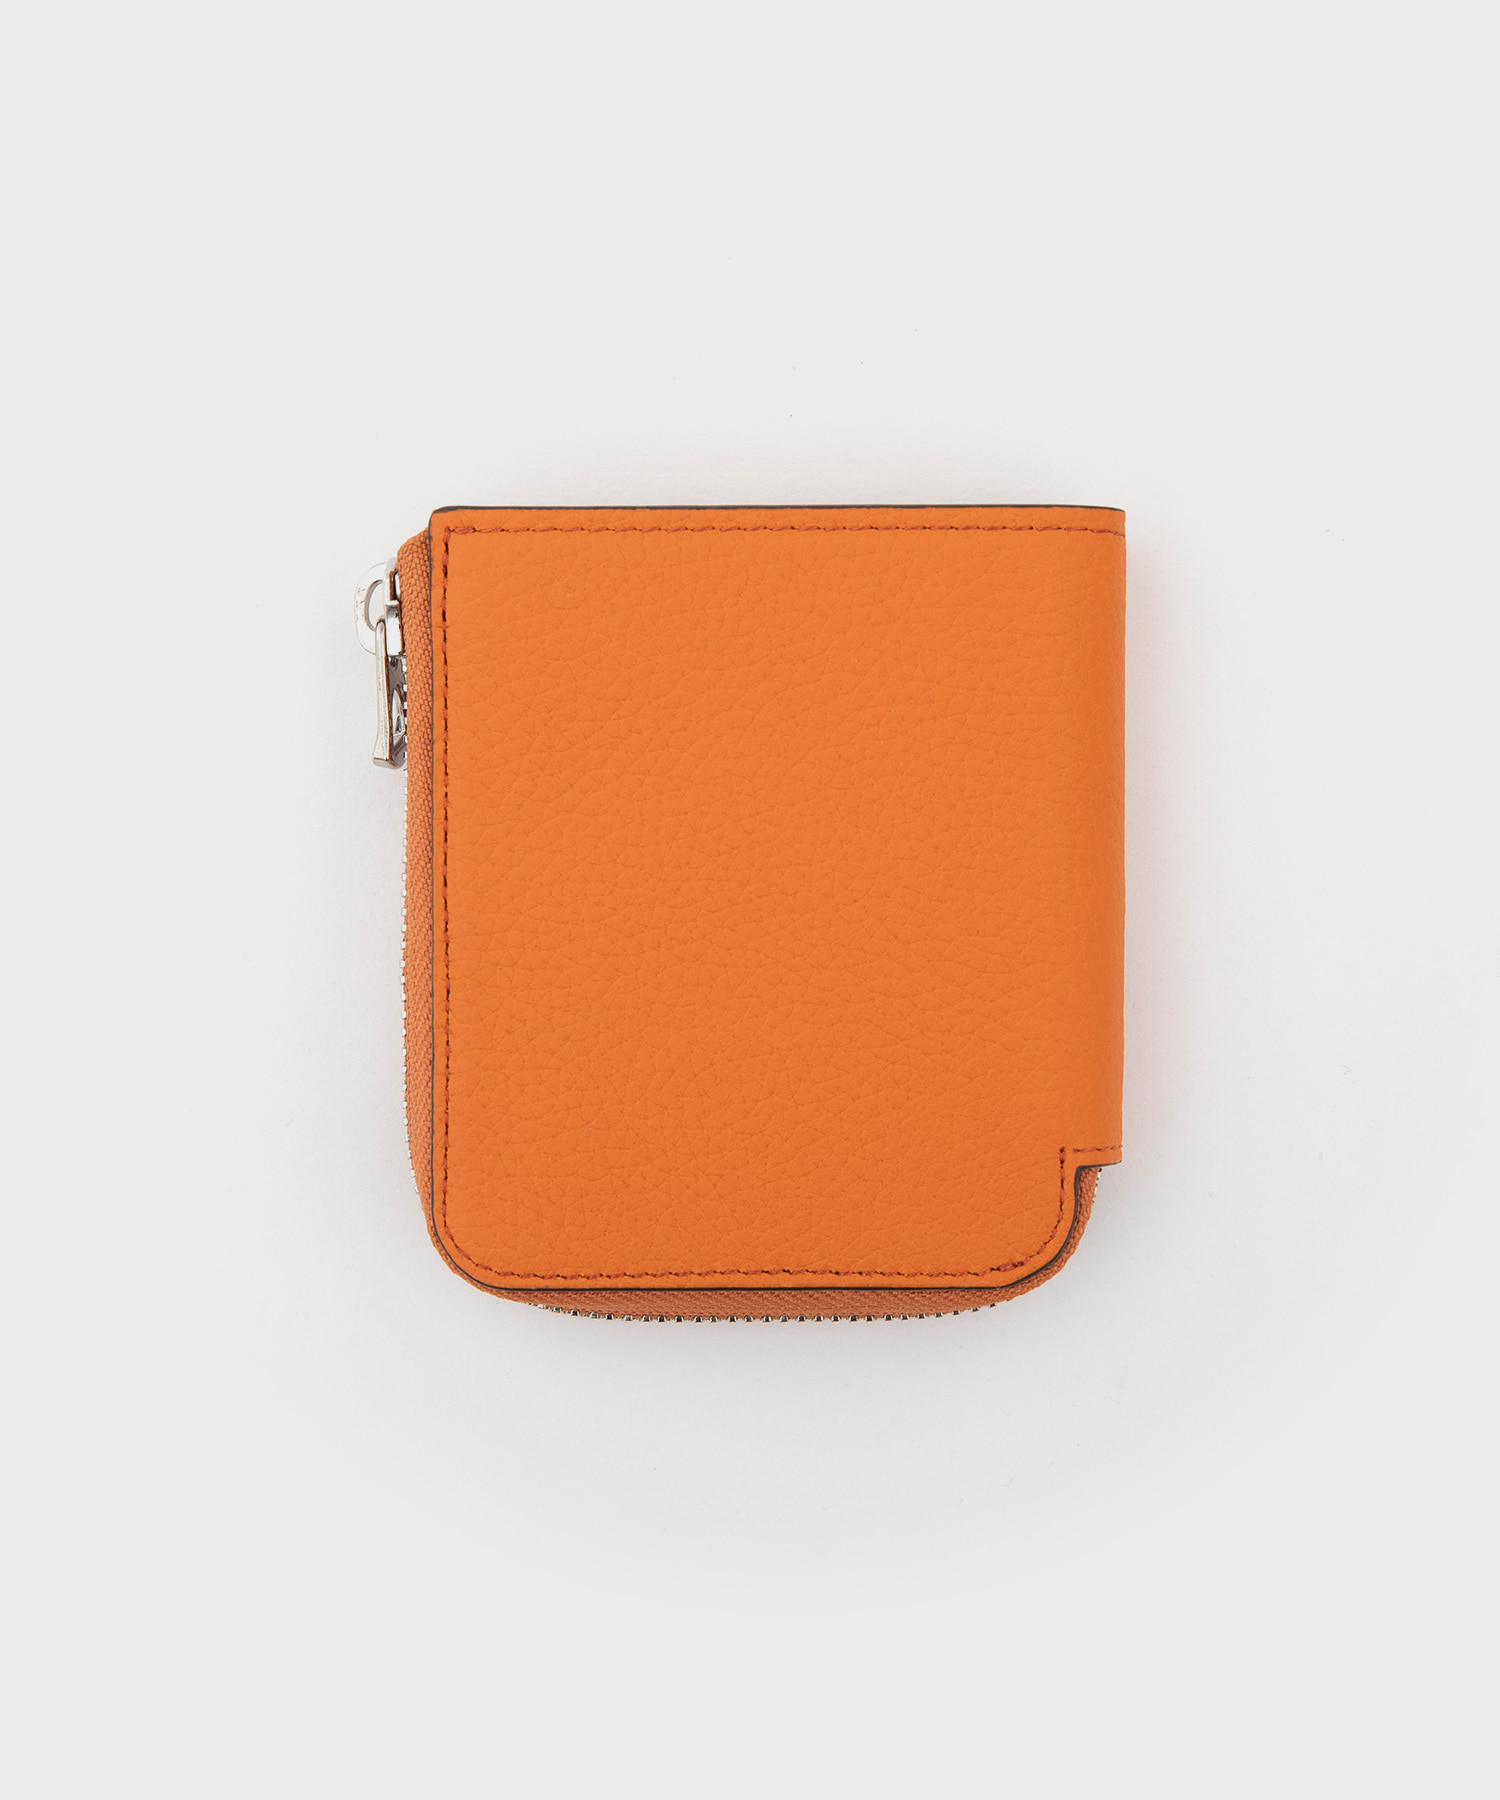 Cristy Very Compact Wallet .5 Diplo Fjord (Orange)